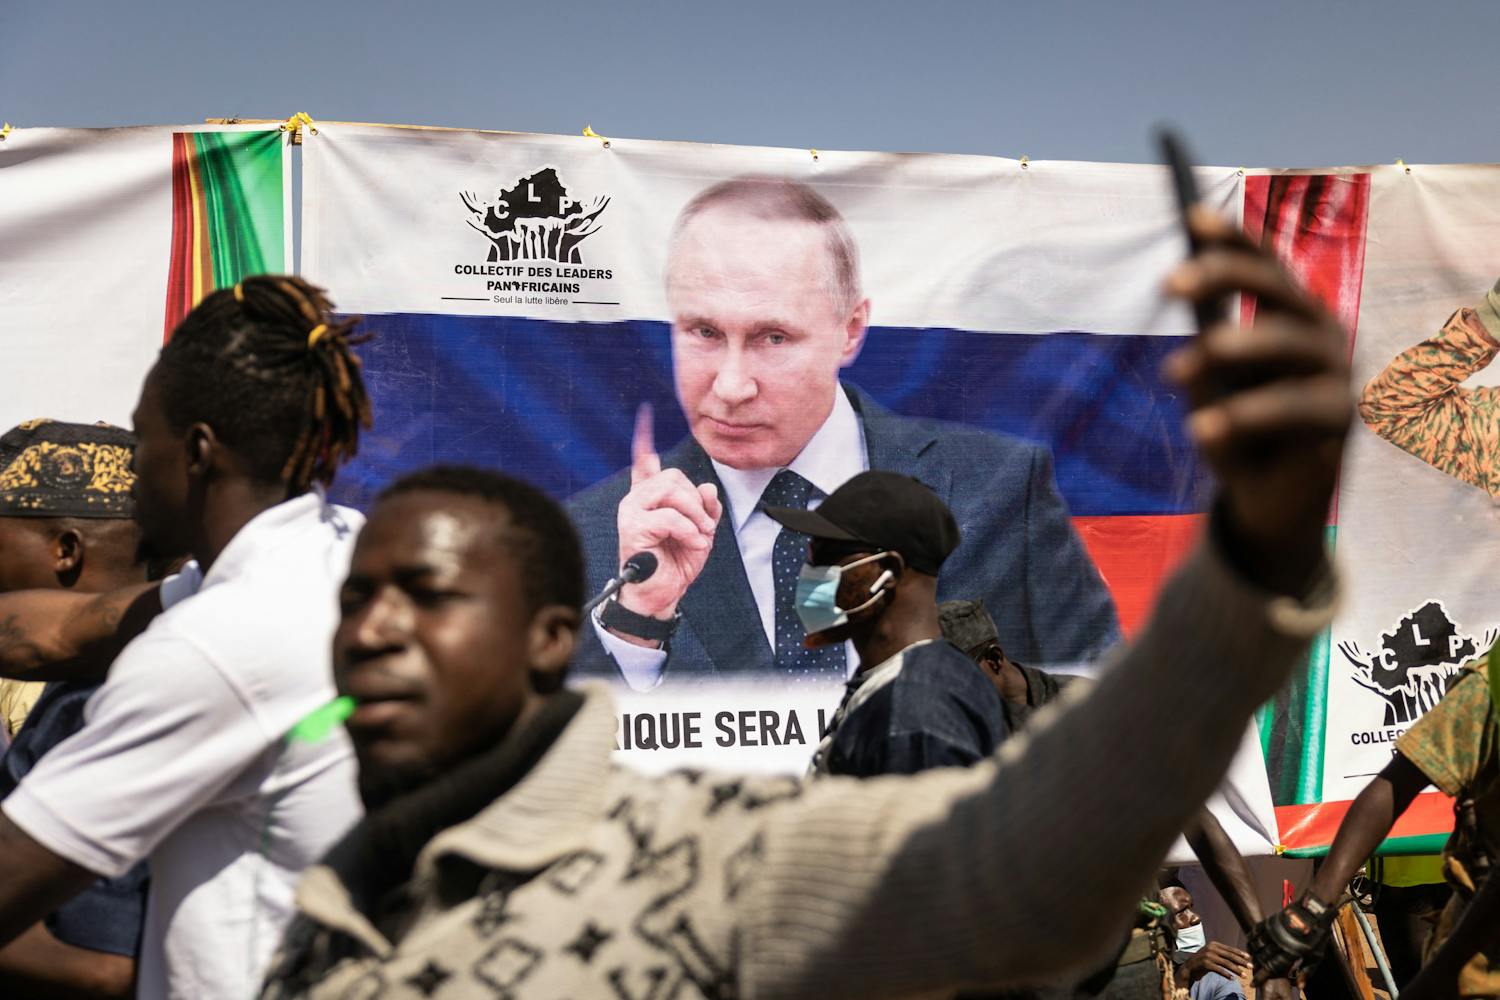 Russia floods Africa with fake news